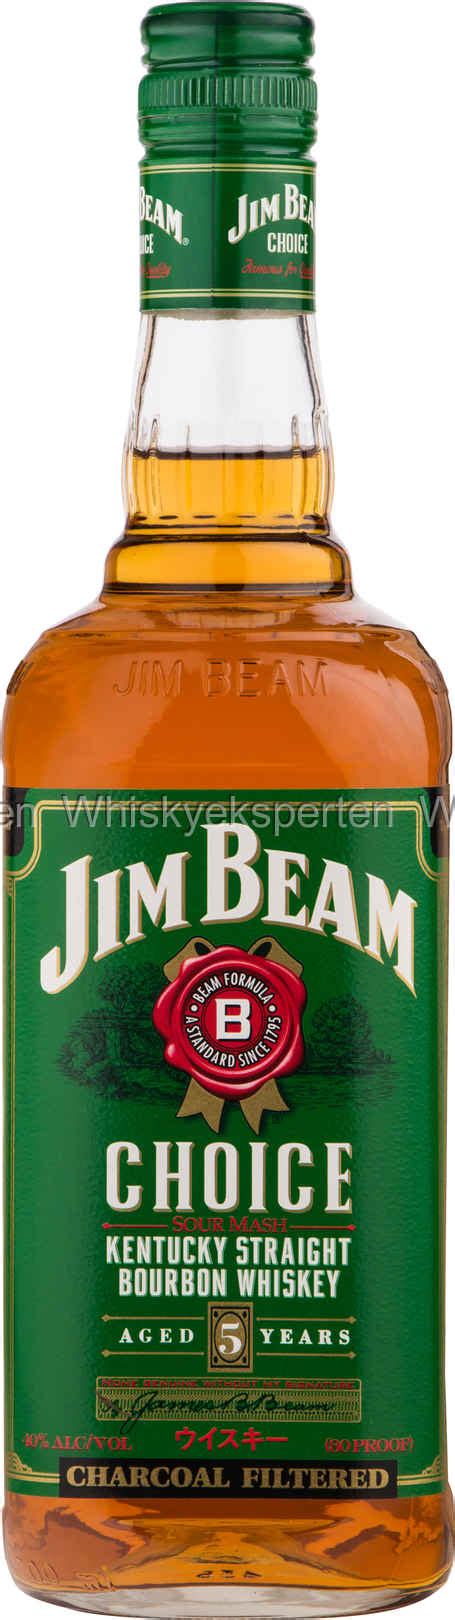 Our journey towards better continues. Jim Beam Choice 5 År Whisky (Green Label)